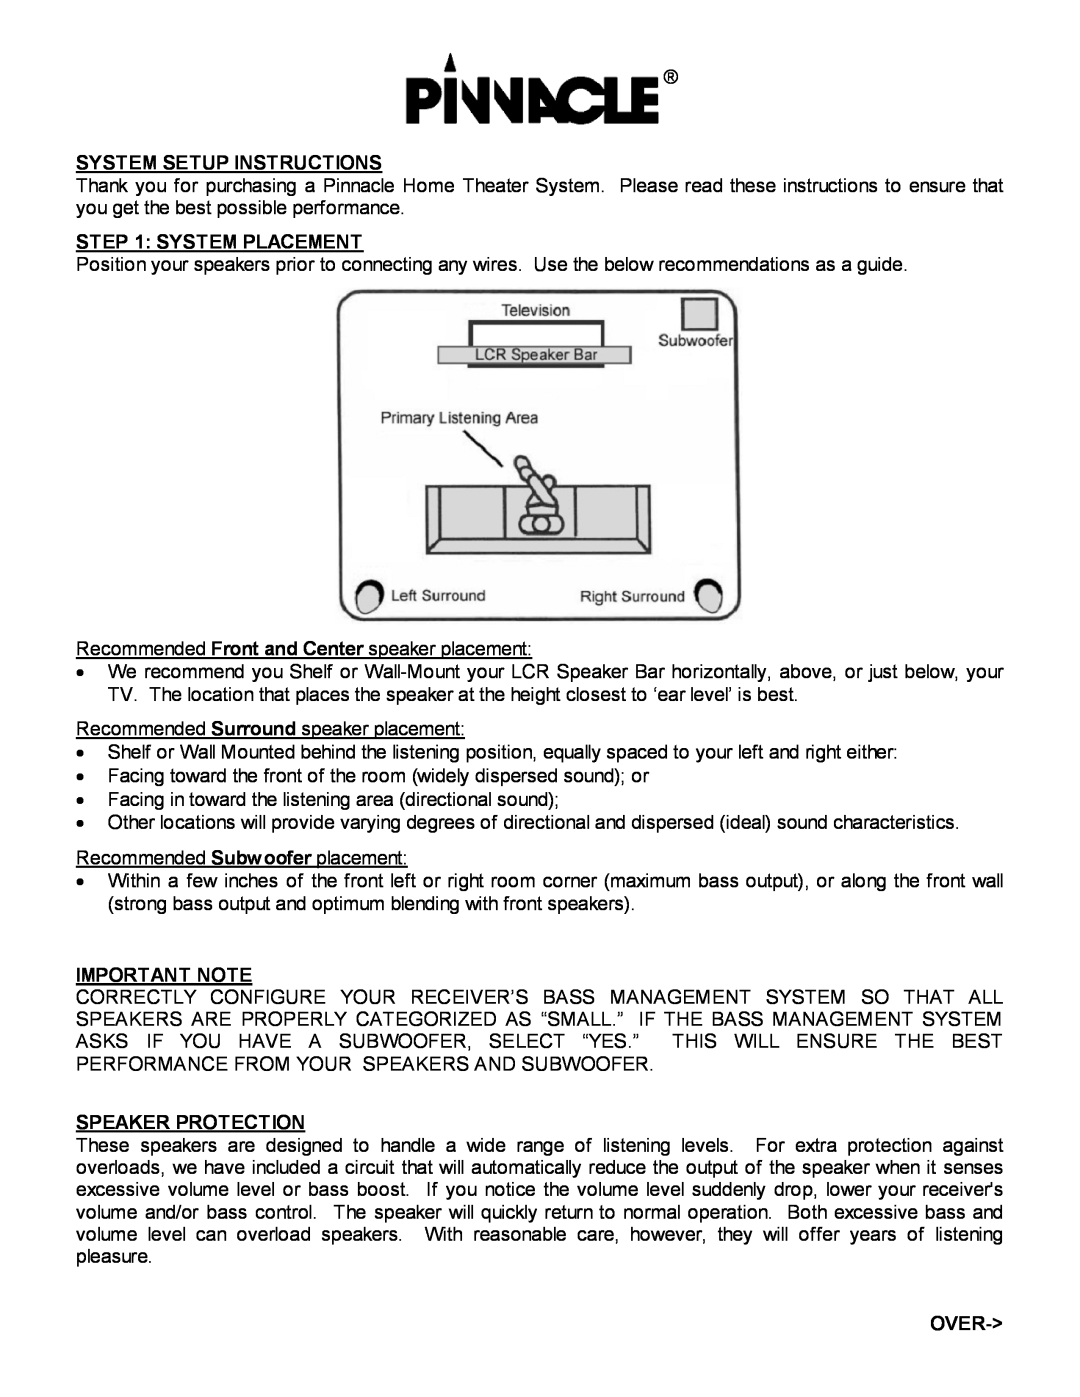 Pinnacle Speakers MB-10000 manual System Setup Instructions, System Placement, Important Note, Speaker Protection, Over 